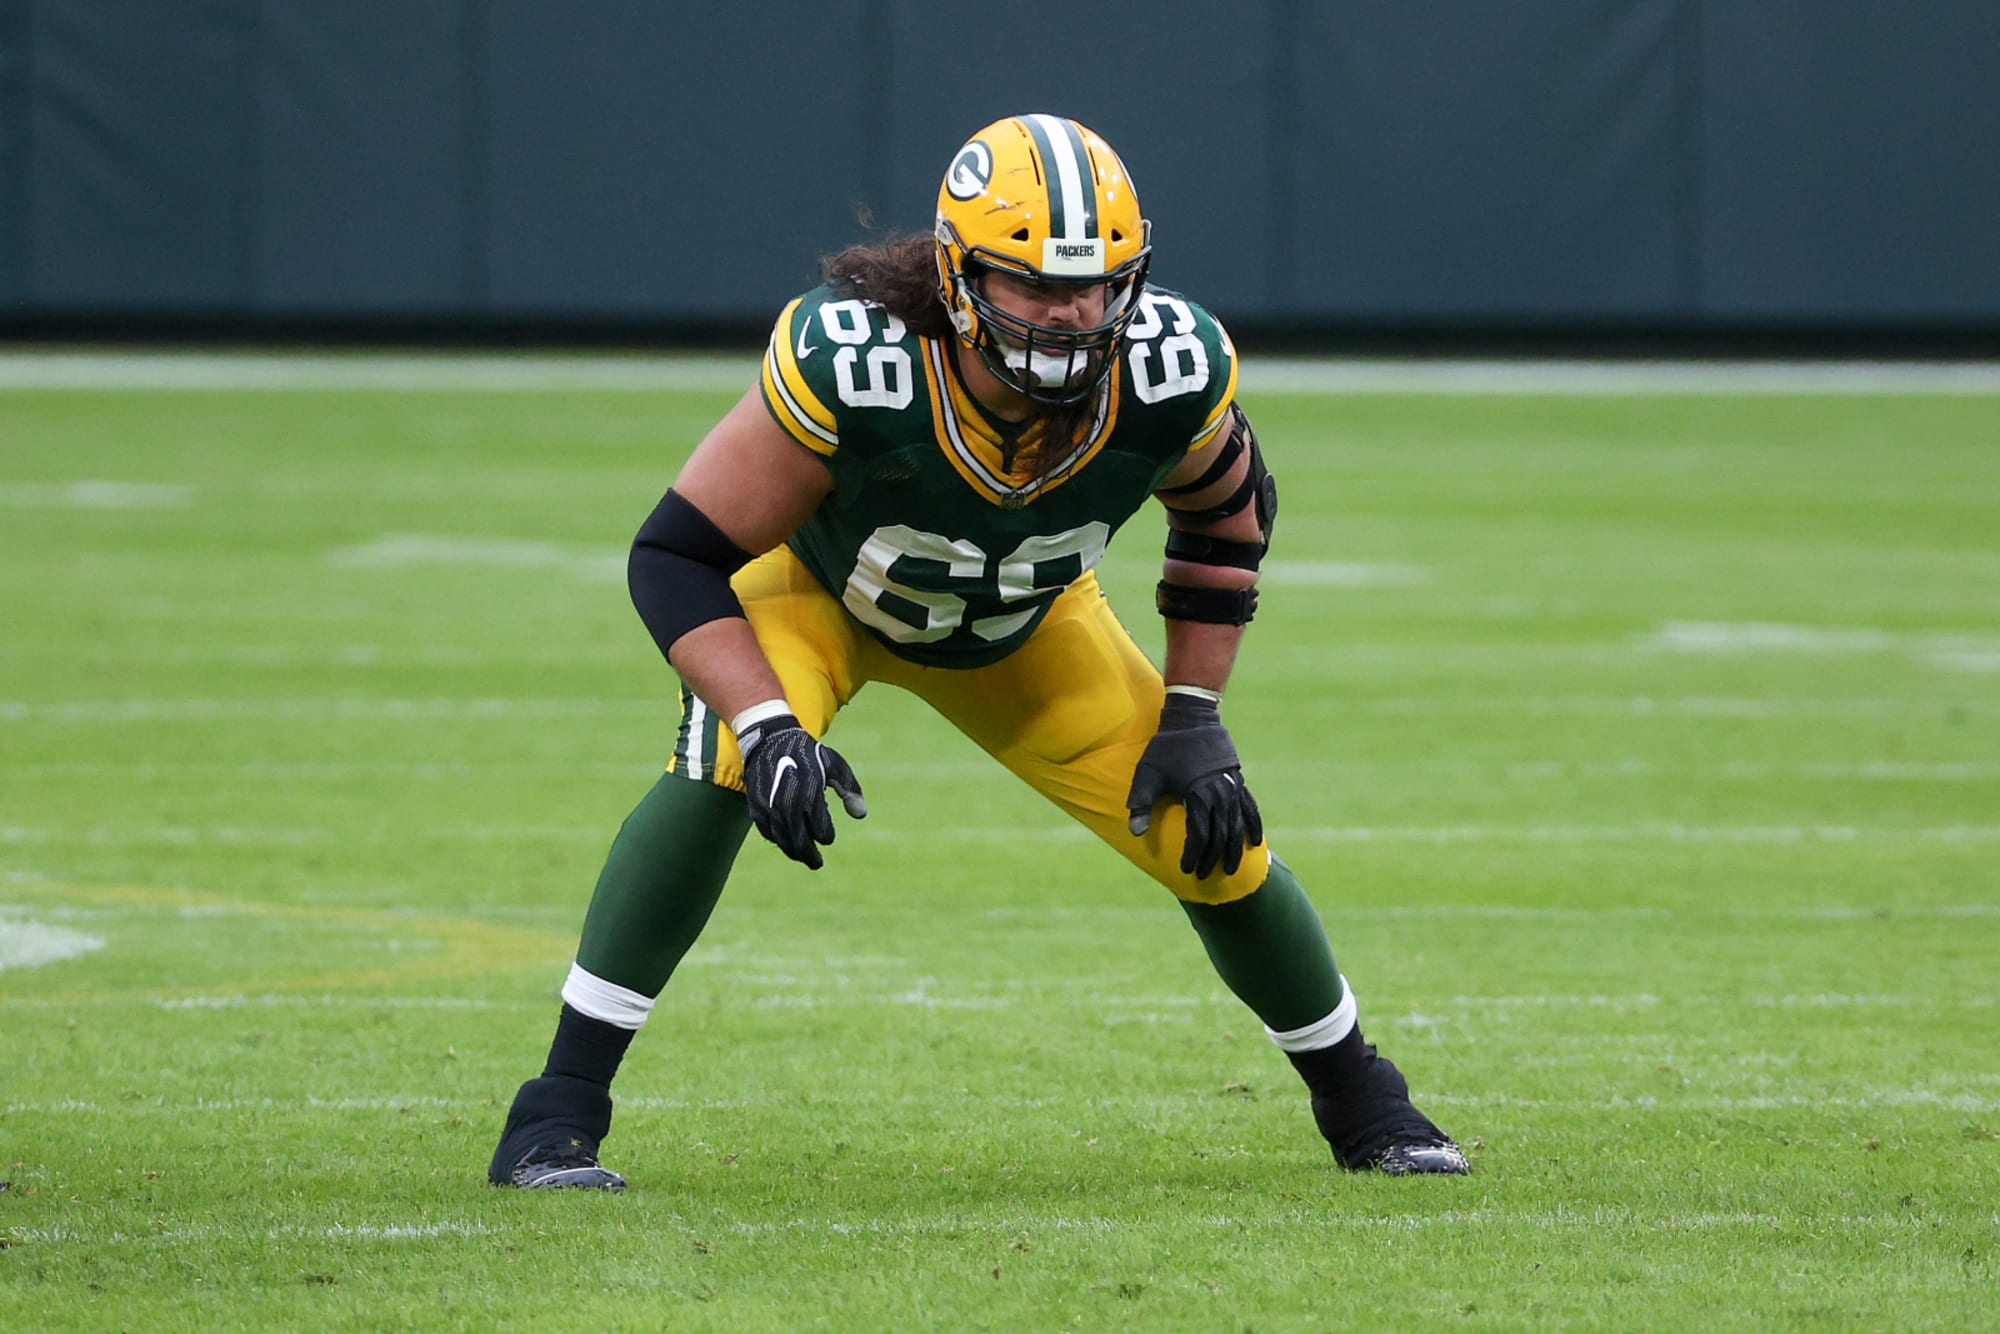 Will Packers' David Bakhtiari miss significant portion of 2021 season?